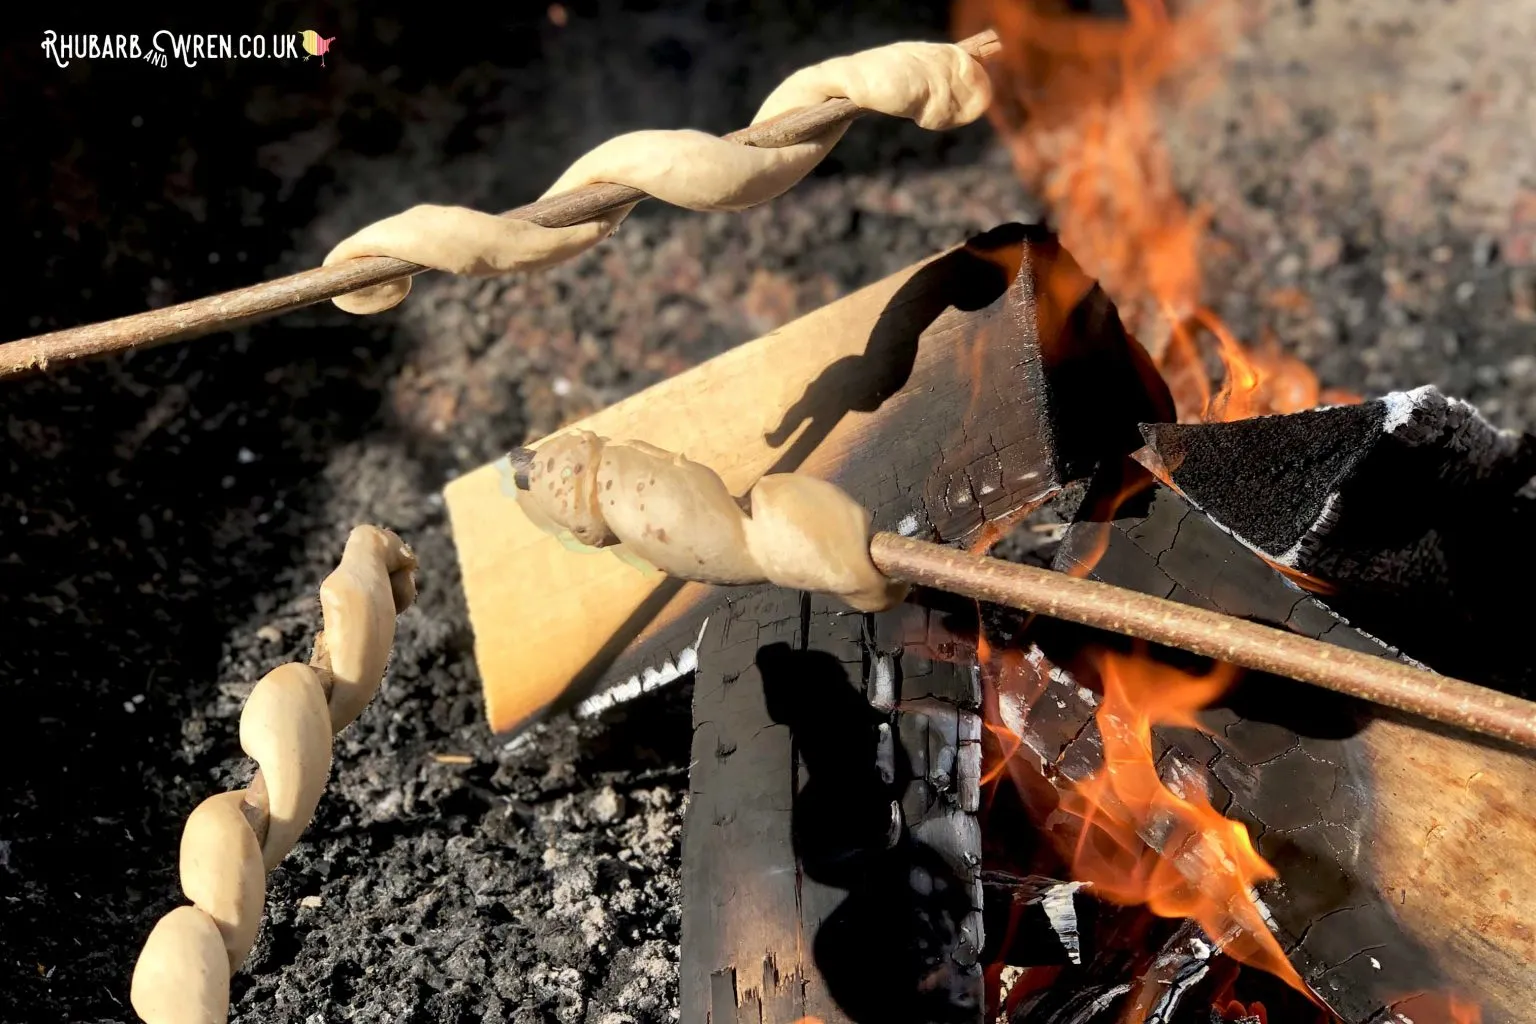 Twists of cinnamon damper bread being cooked over a fire on sticks.